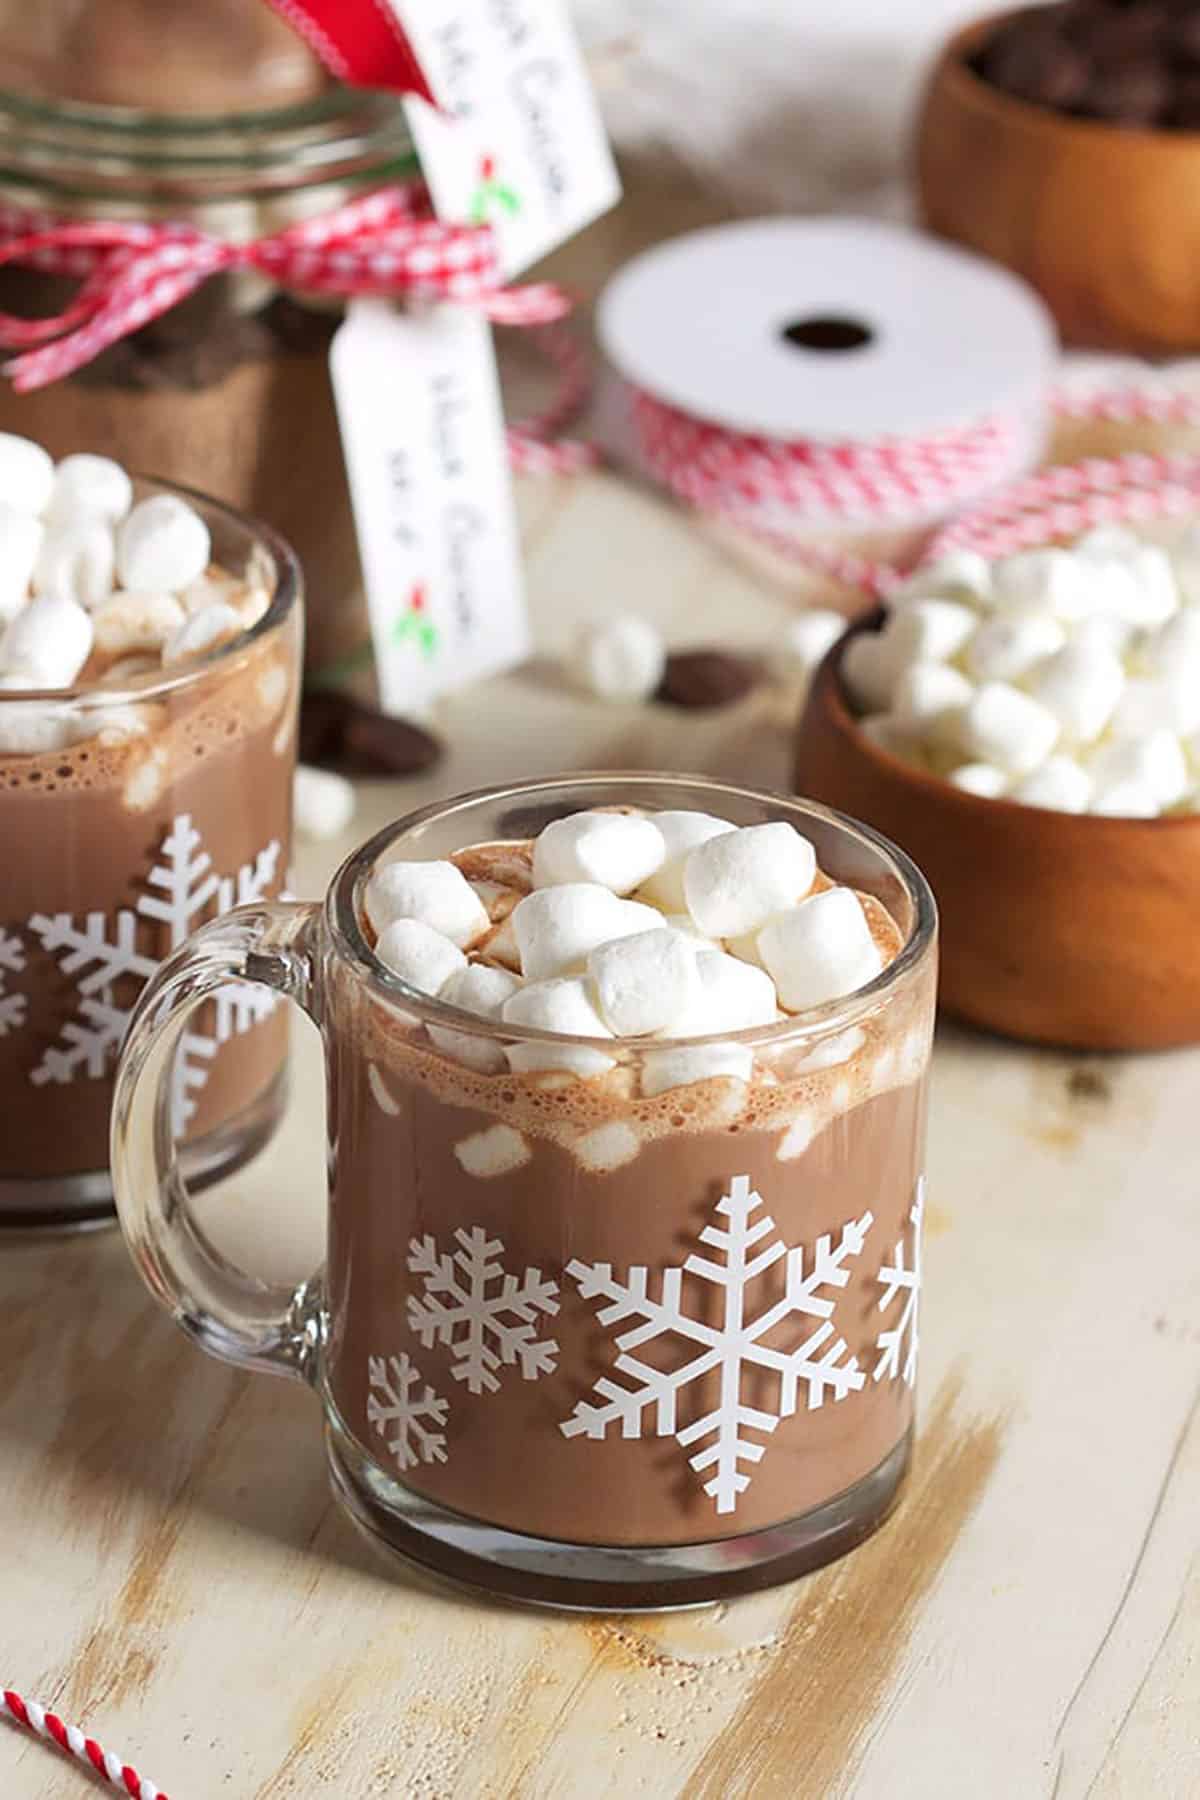 Hot cocoa in a glass mug with snowflakes on it and jars of hot cocoa mix in the background.